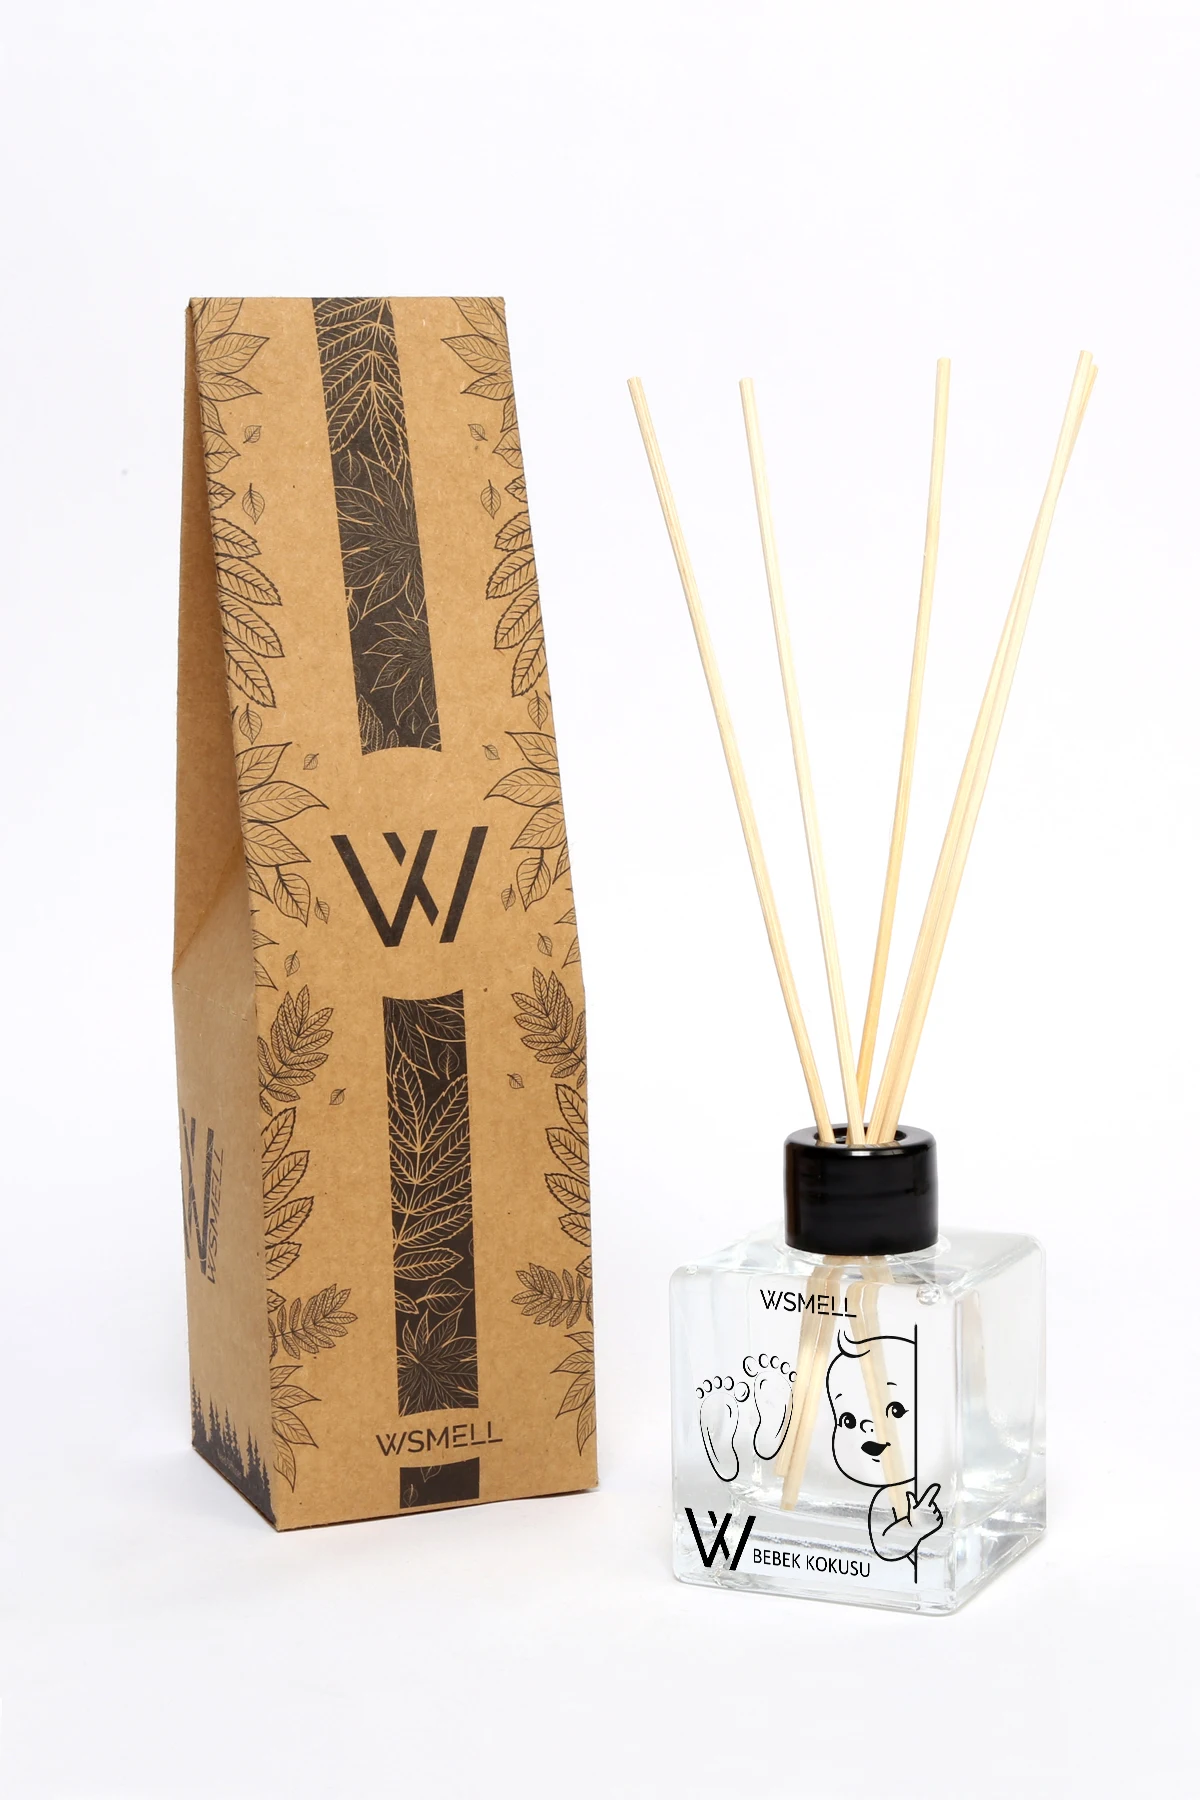 100ml Perfume Decorative Rattan Sticks Purifying Air Aroma Diffuser Set Aromatherapy home and Office Fragrance Essential Oil